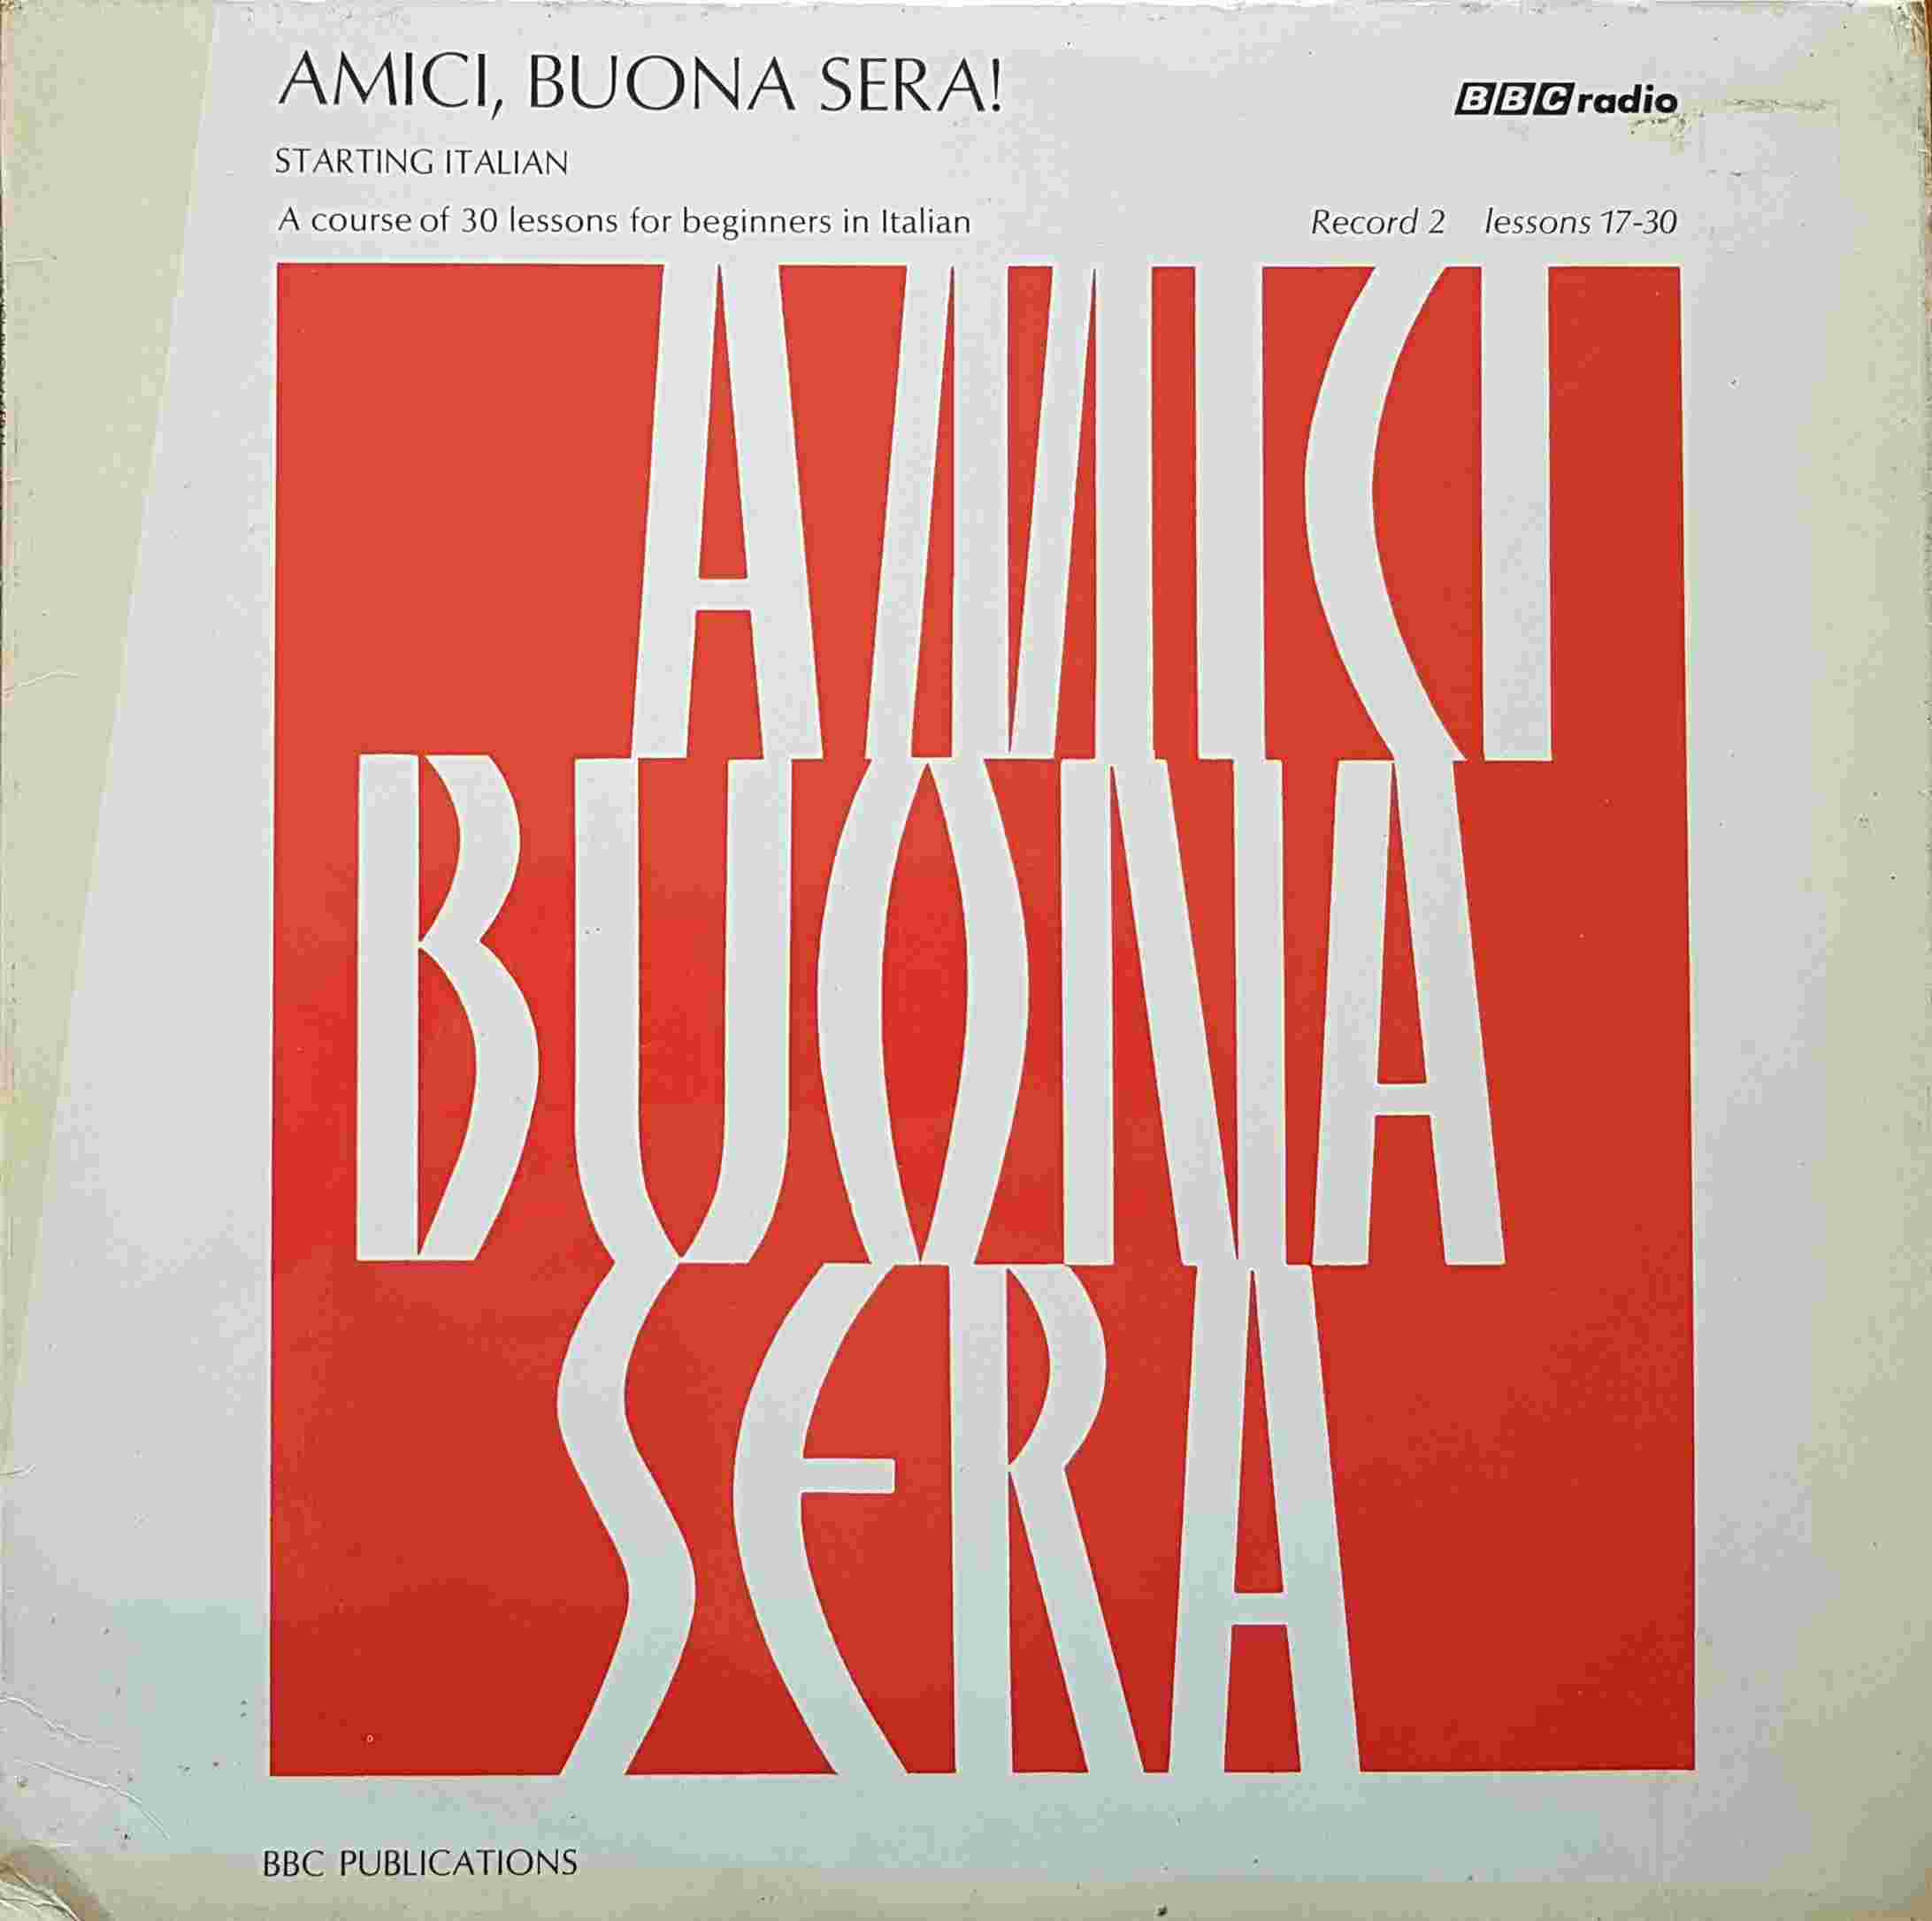 Picture of OP 147/148 Amici, Buona sera! - Starting Italian - A course of 30 lessons for beginners in Italian -  Record 2 - Lessons 17 - 30 by artist Hugh Shankland / Ernesto Mussi from the BBC albums - Records and Tapes library